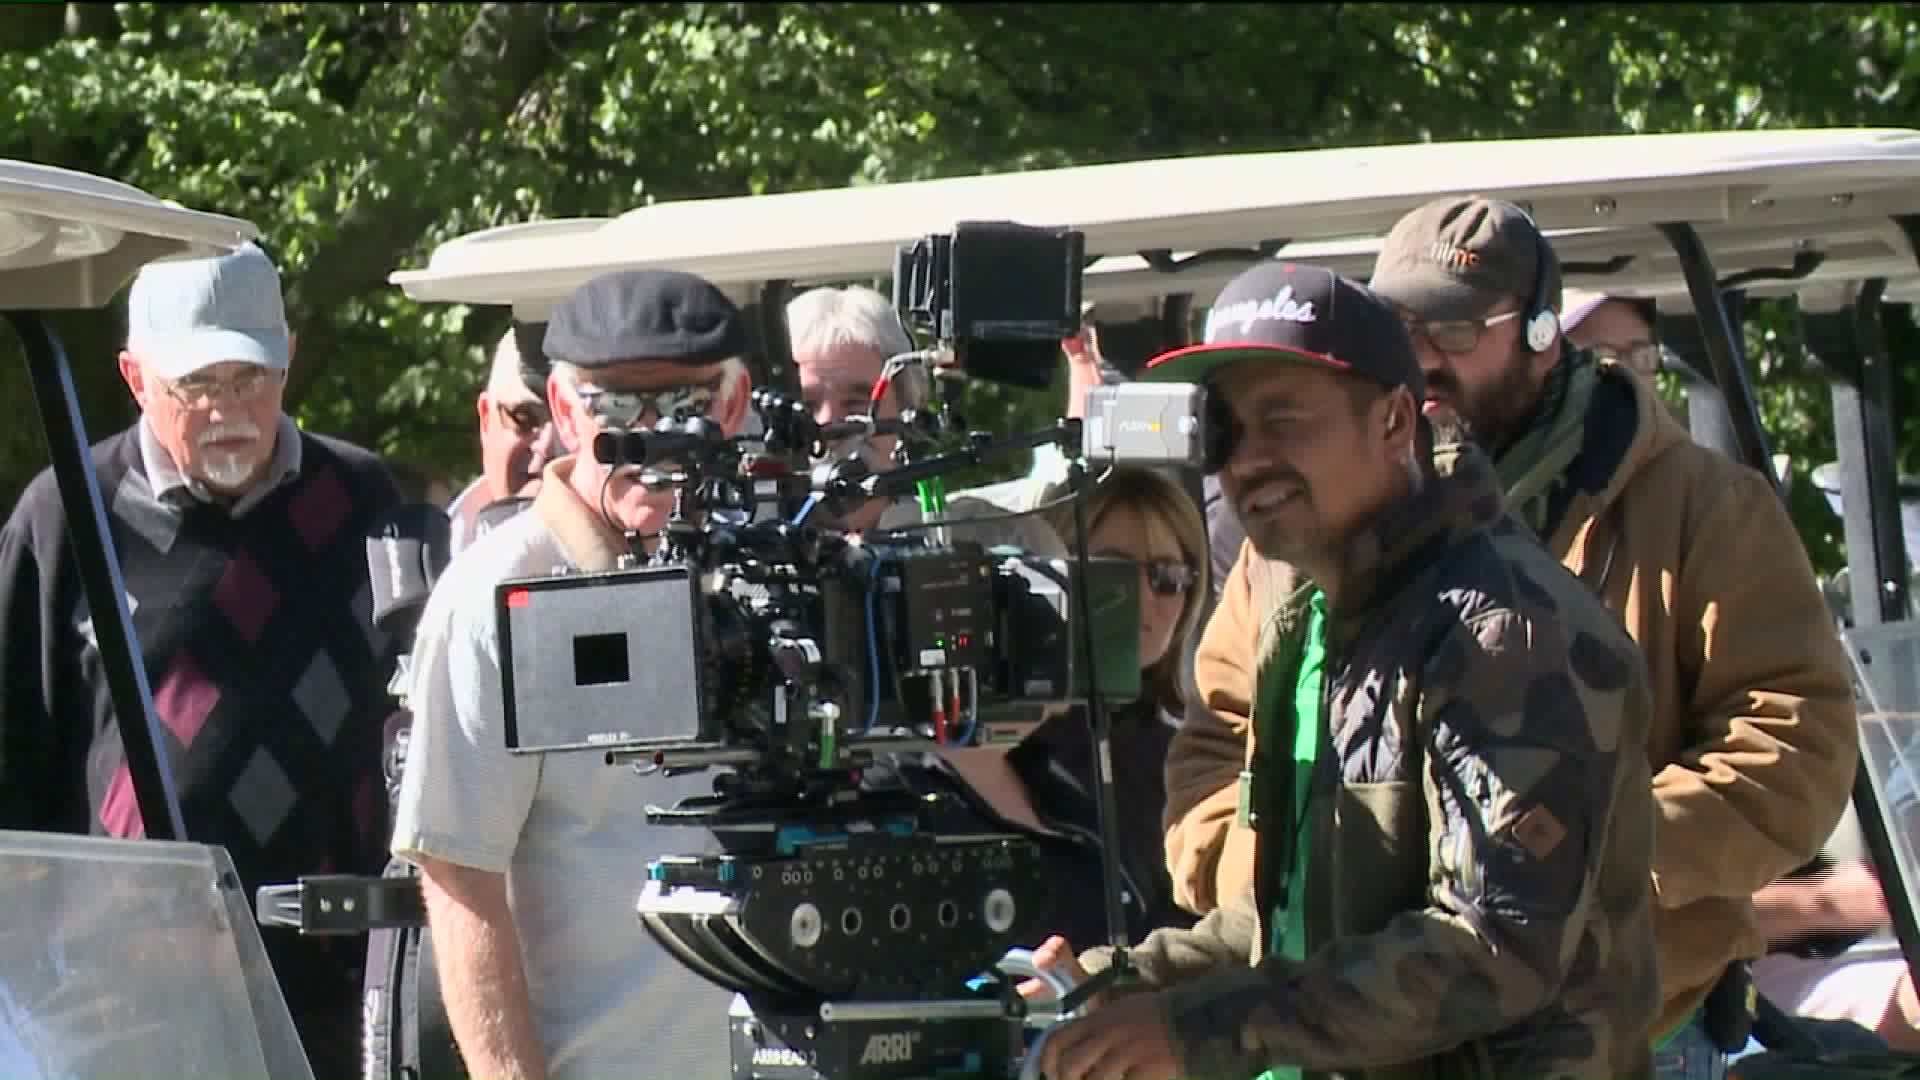 Extras Show up for Movie Shoot